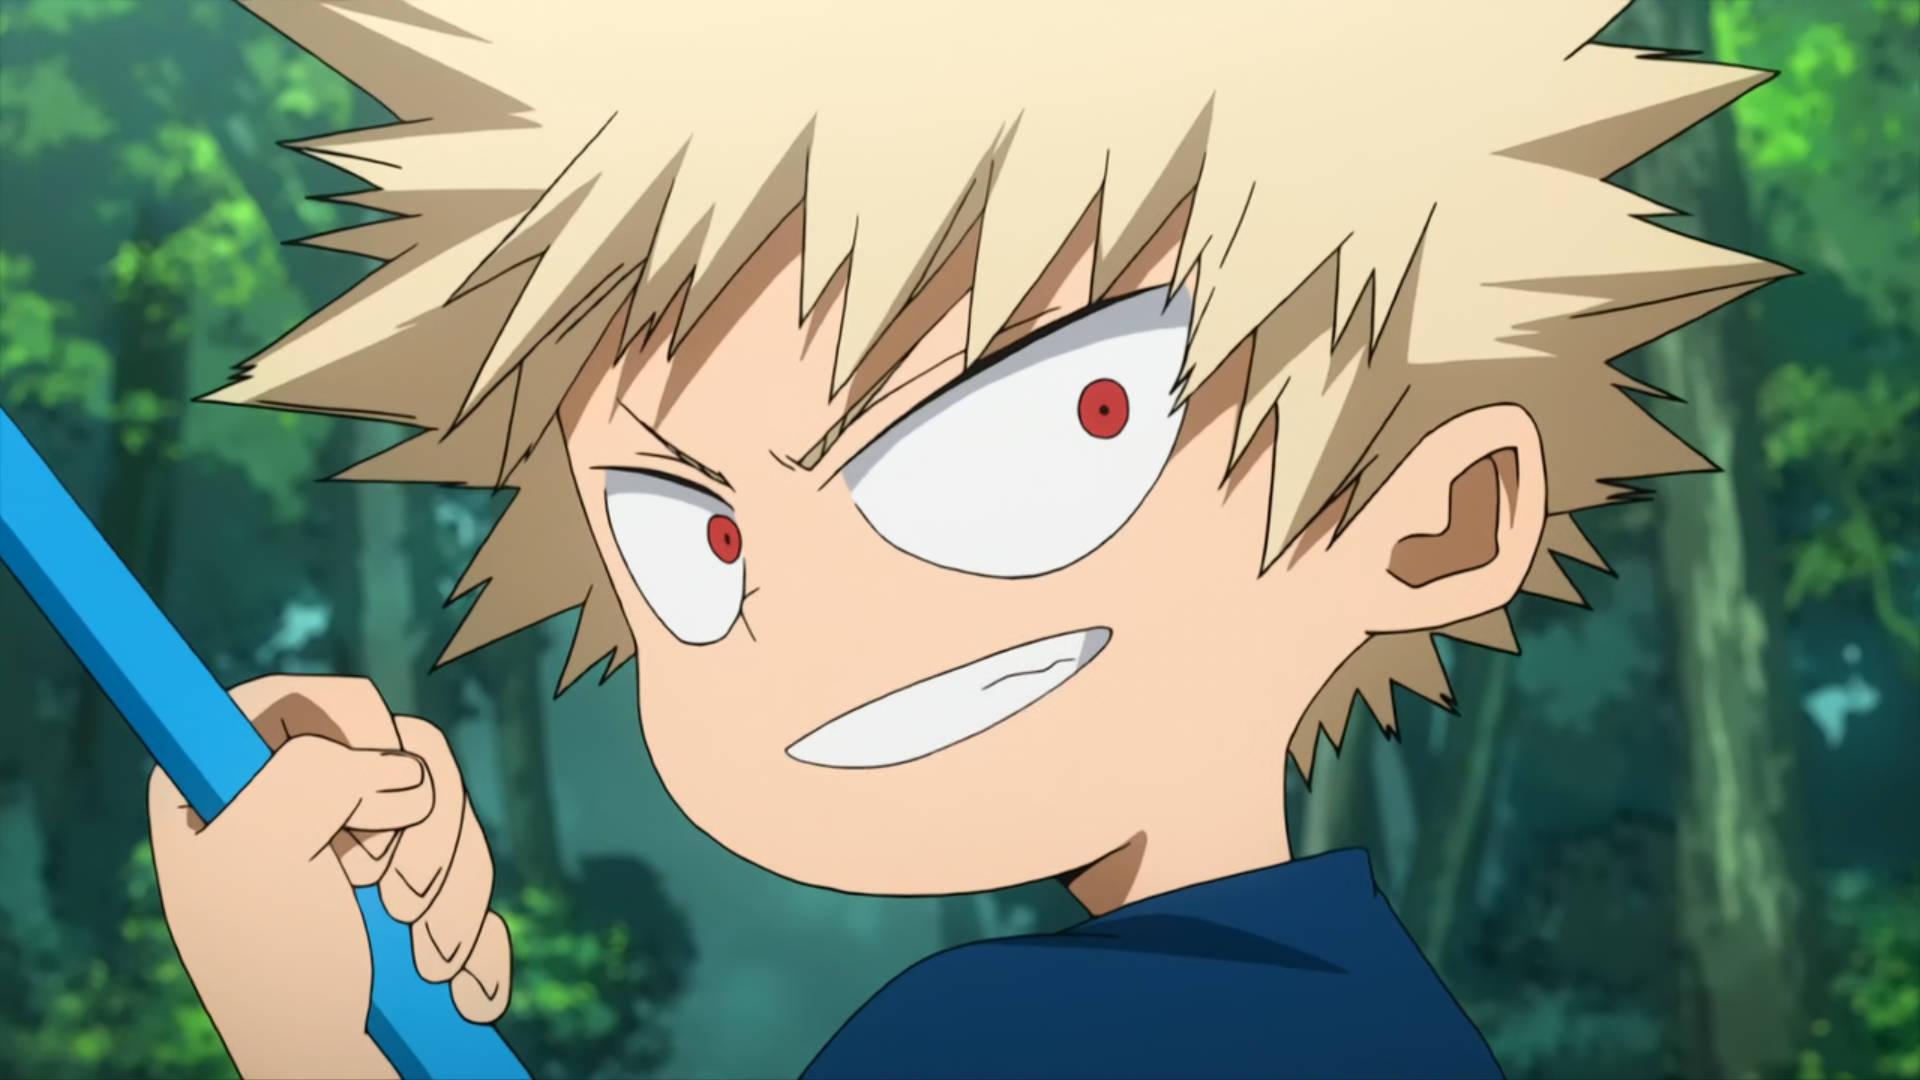 Cute Bakugou, Looking To Take Over The World!